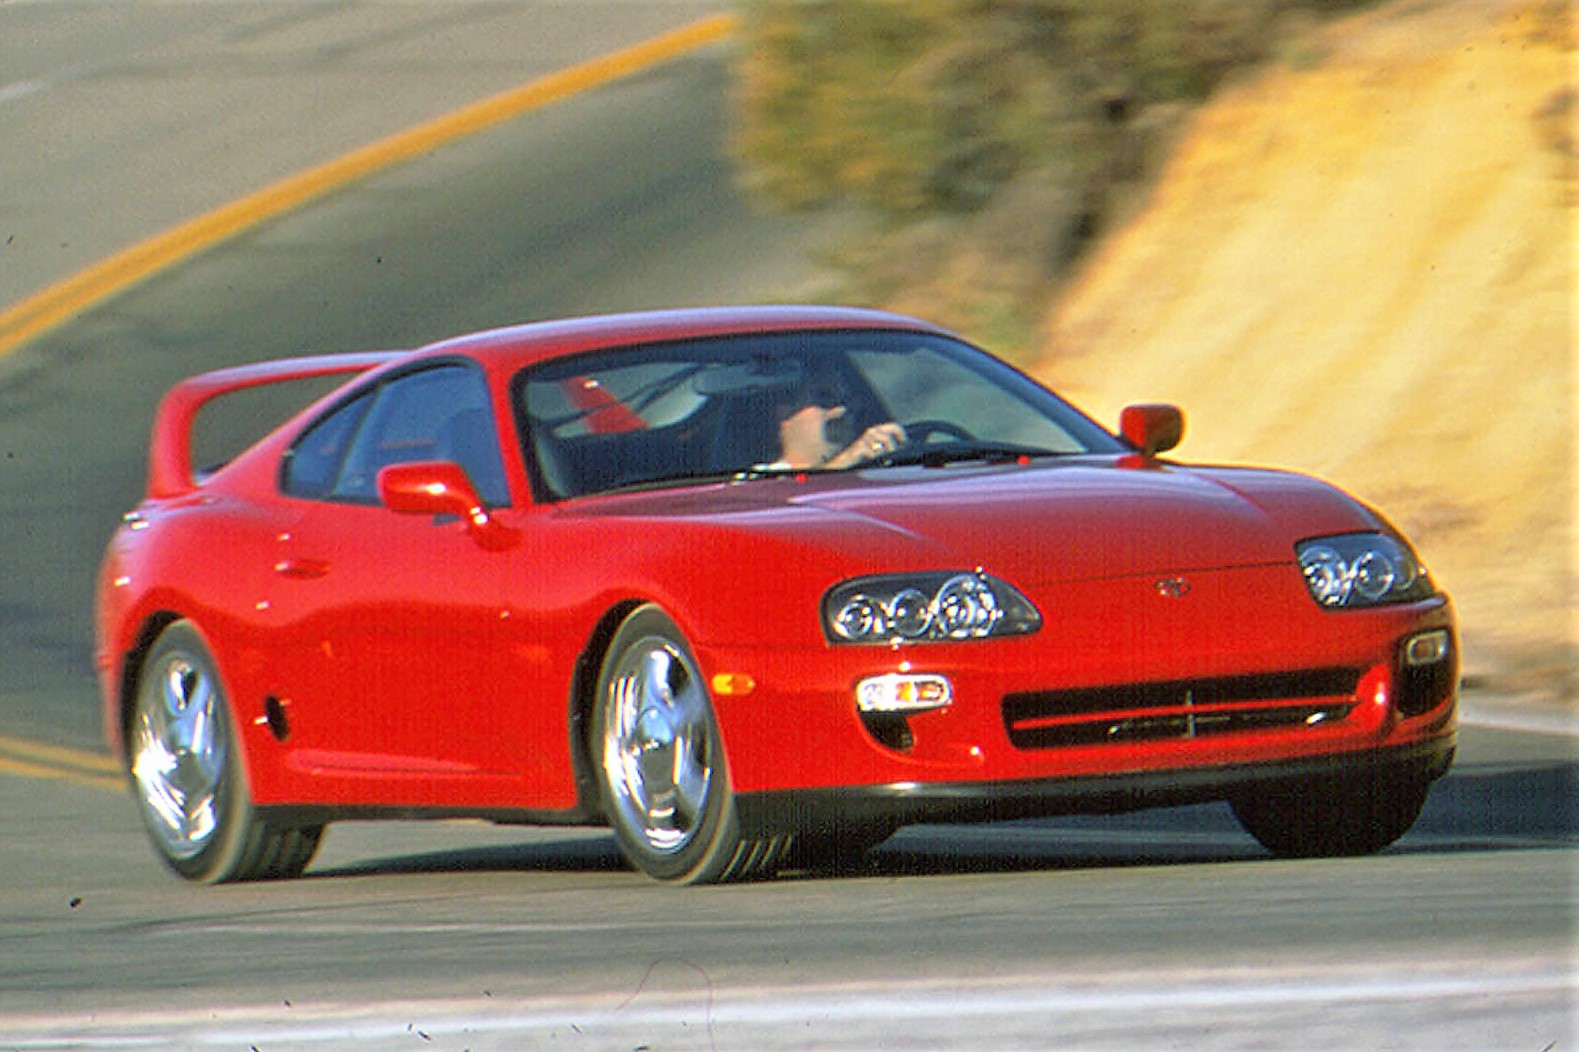 1990s, Question of the Day: What is your favorite car from the 1990s?, ClassicCars.com Journal